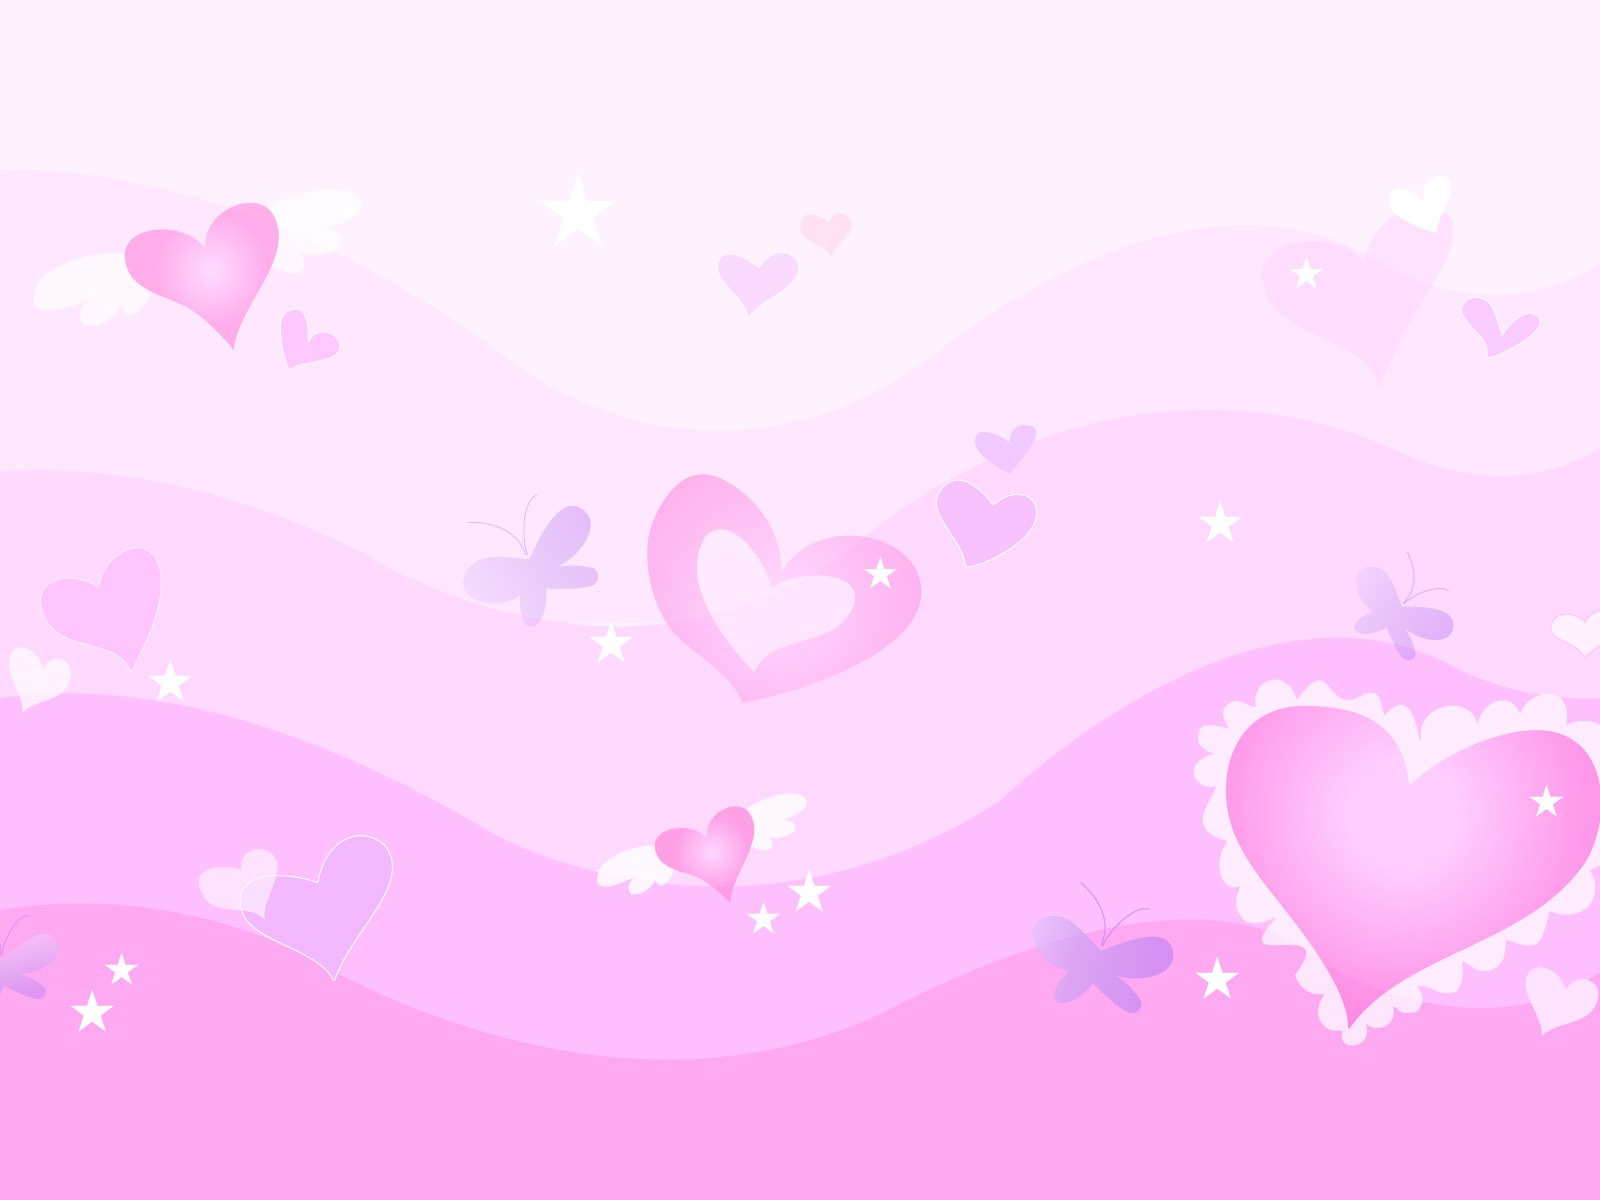 Valentine's Day Love Theme Wallpapers (2) #4 - 1600x1200